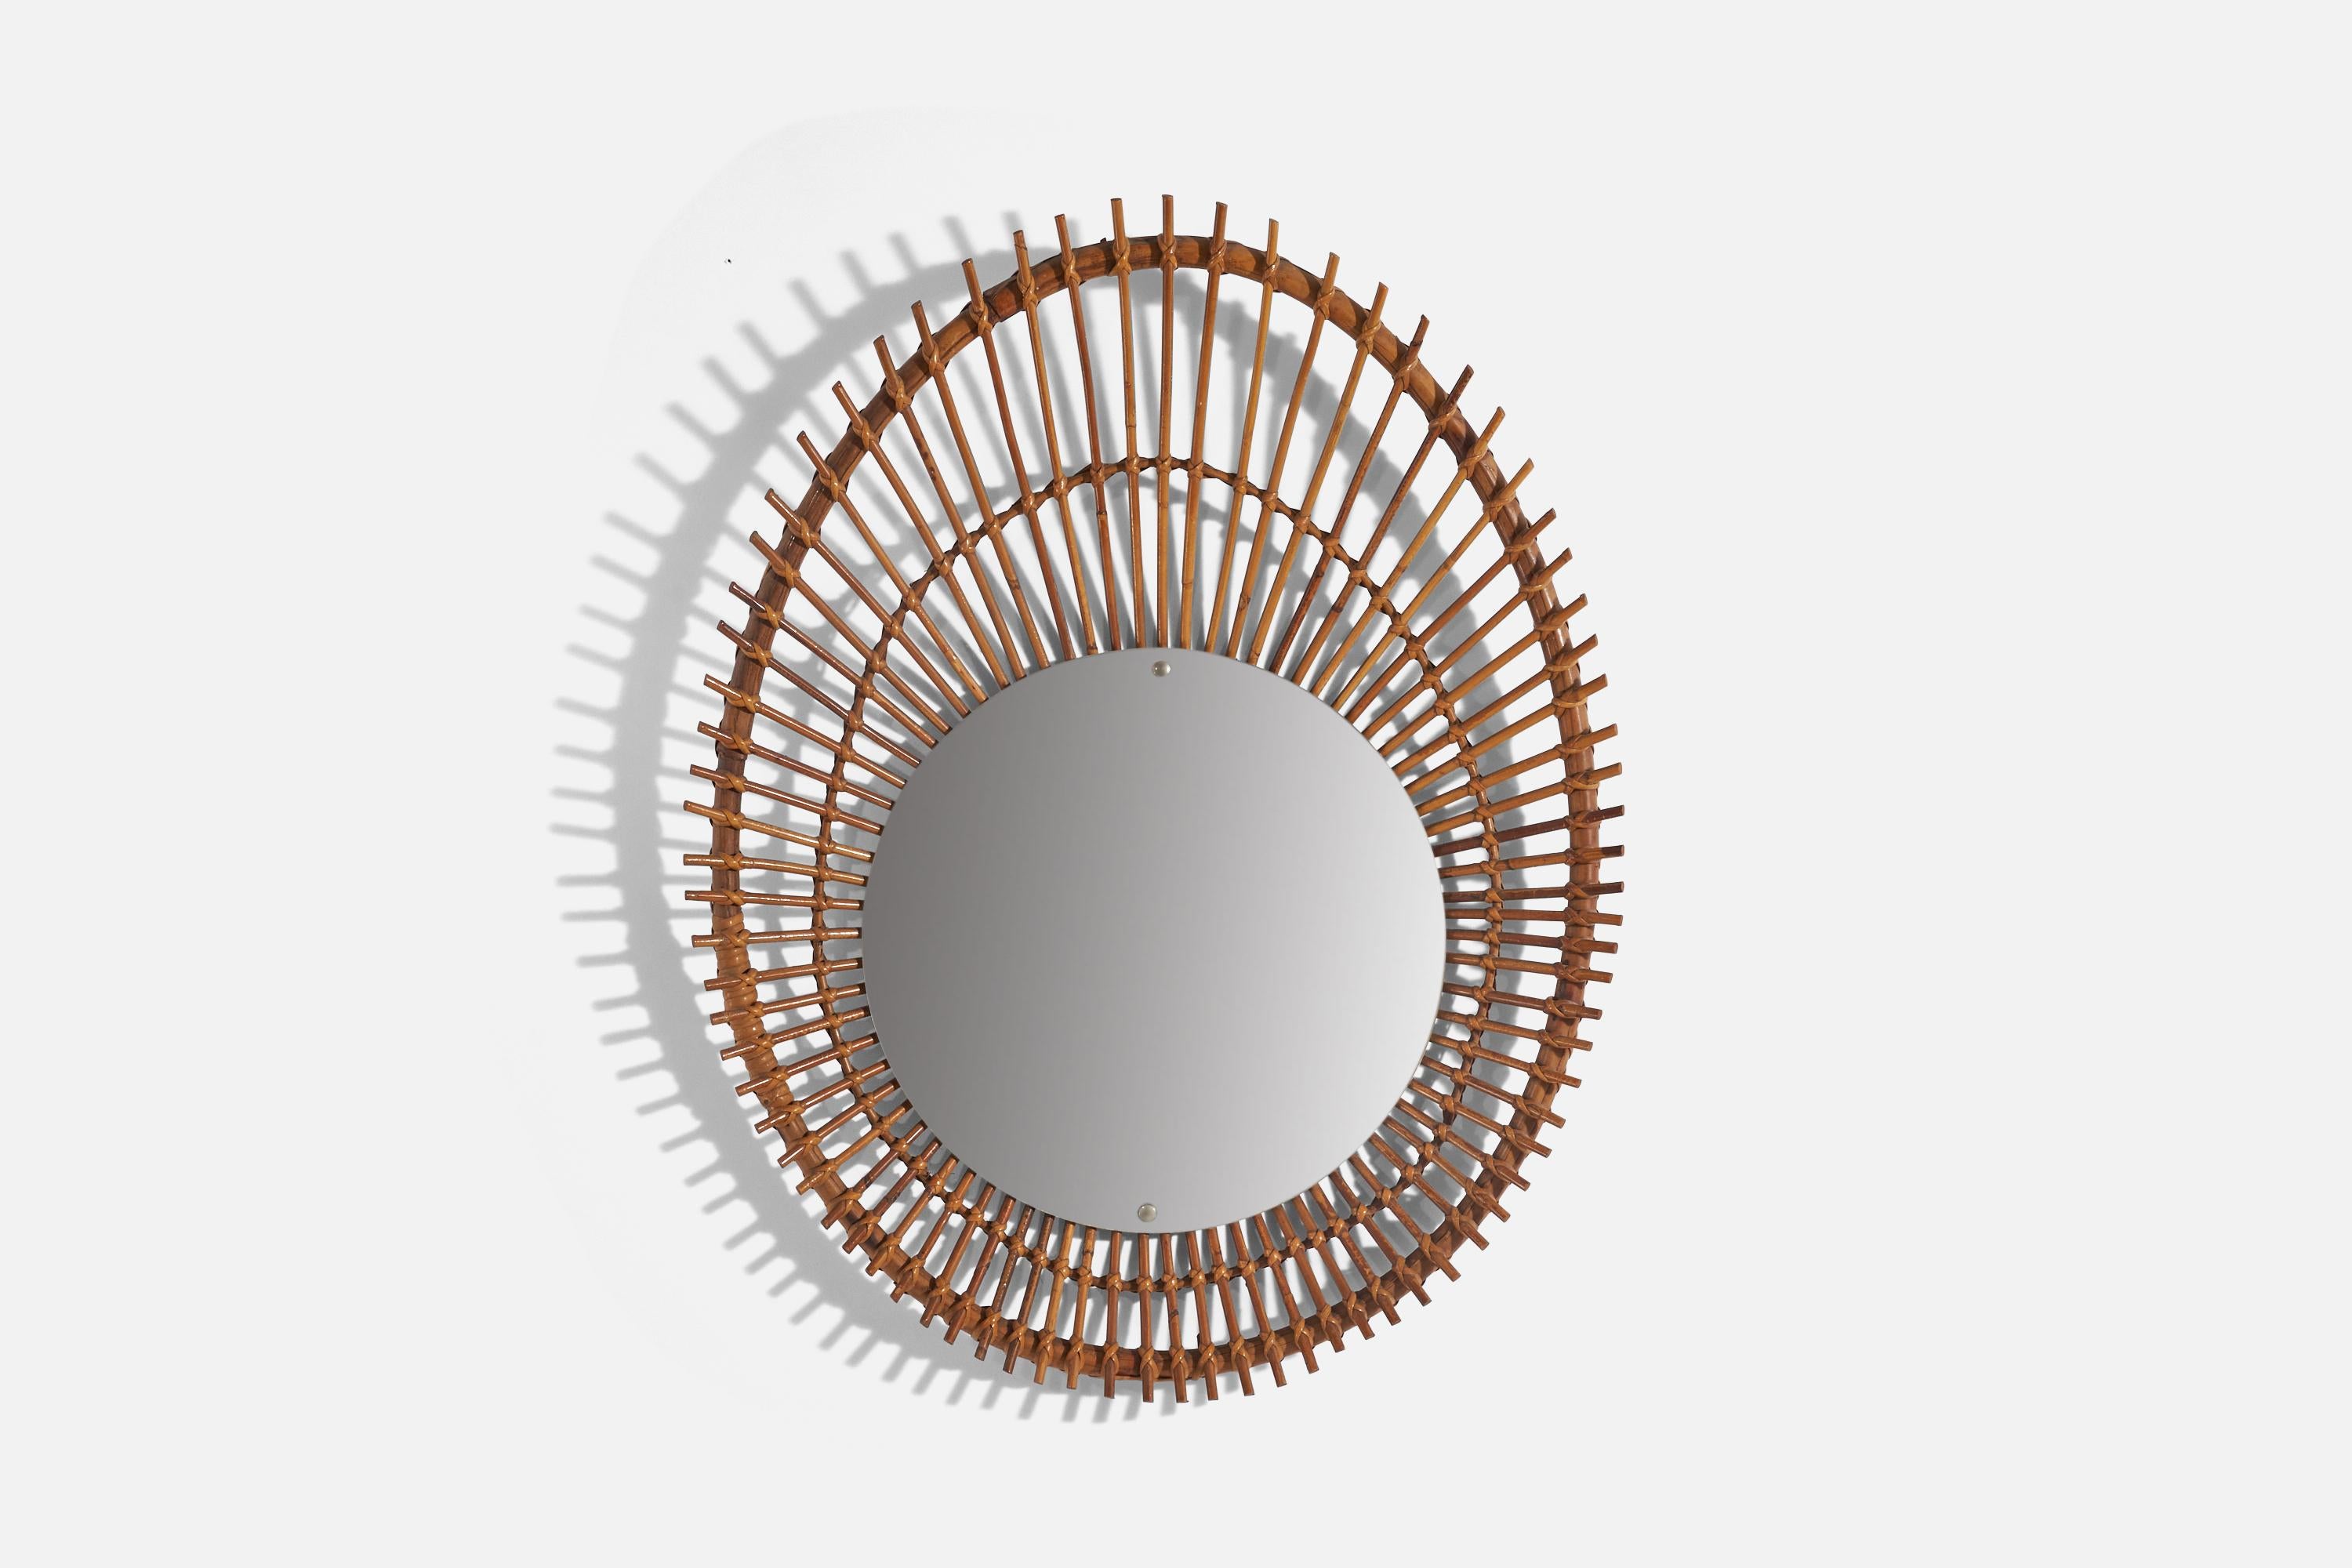 A rattan wall mirror designed and produced by an Italian designer, Italy, c. 1960s.
   